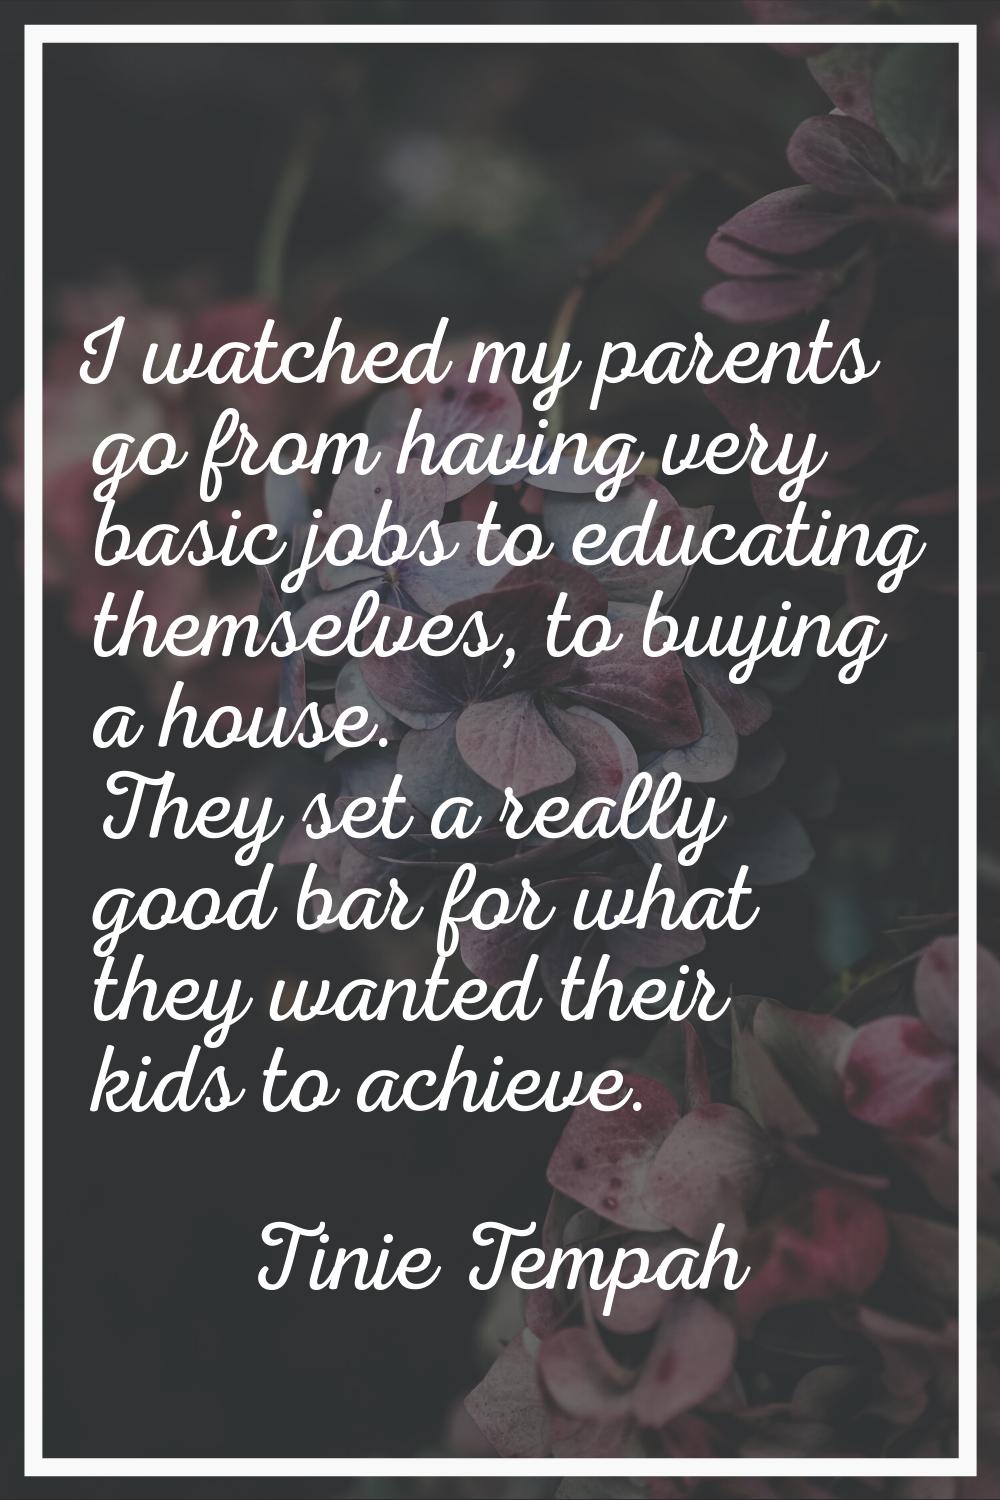 I watched my parents go from having very basic jobs to educating themselves, to buying a house. The